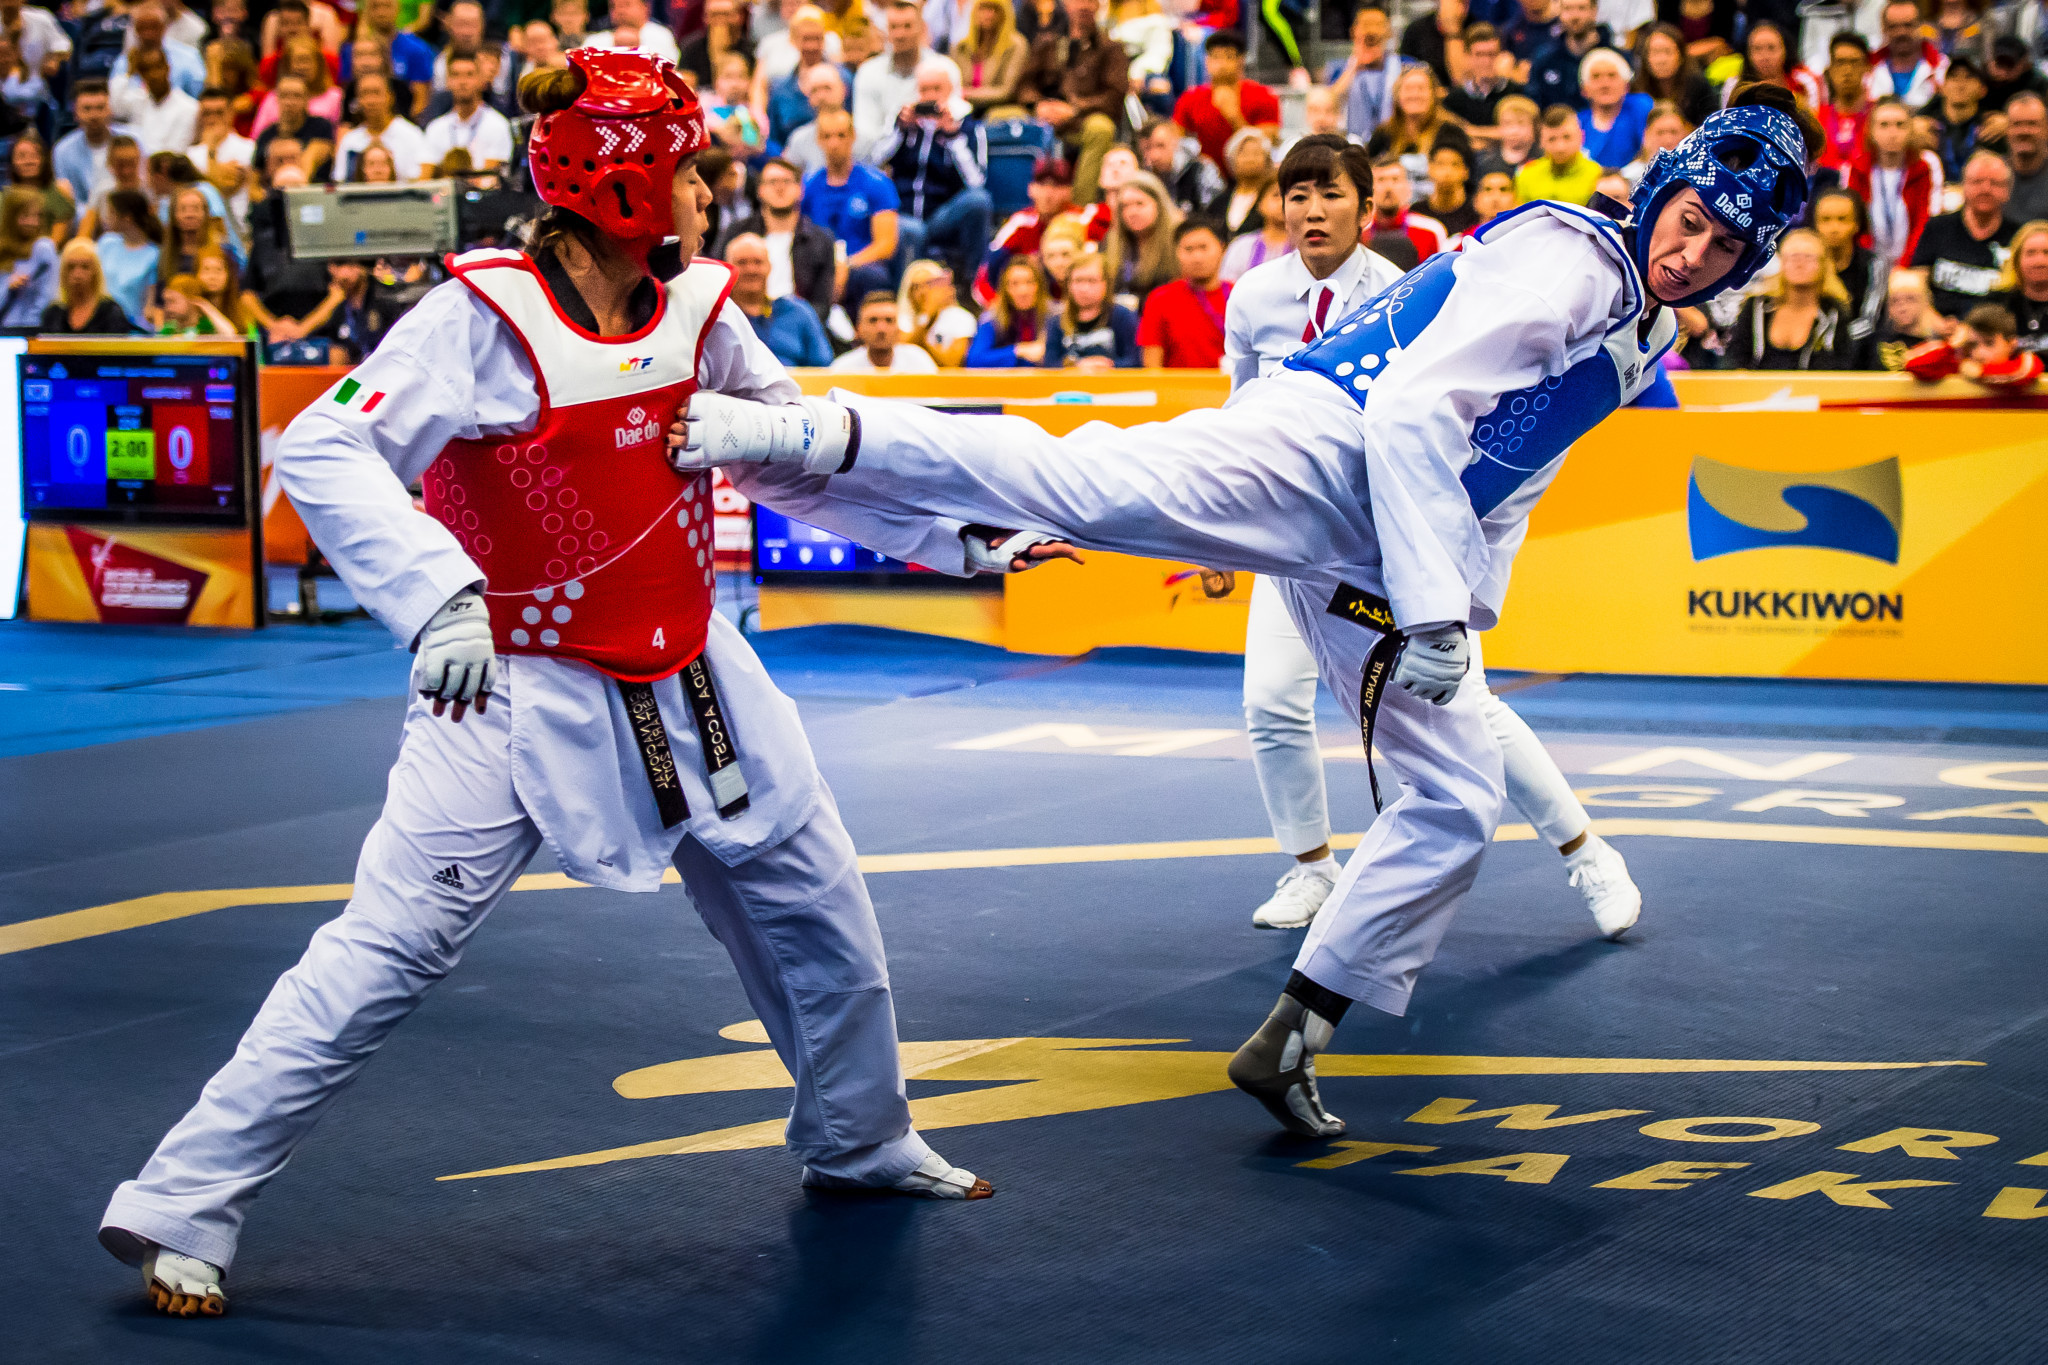 Bianca Walkden had to settle for silver in front of her home crowd in Manchester ©World Taekwondo